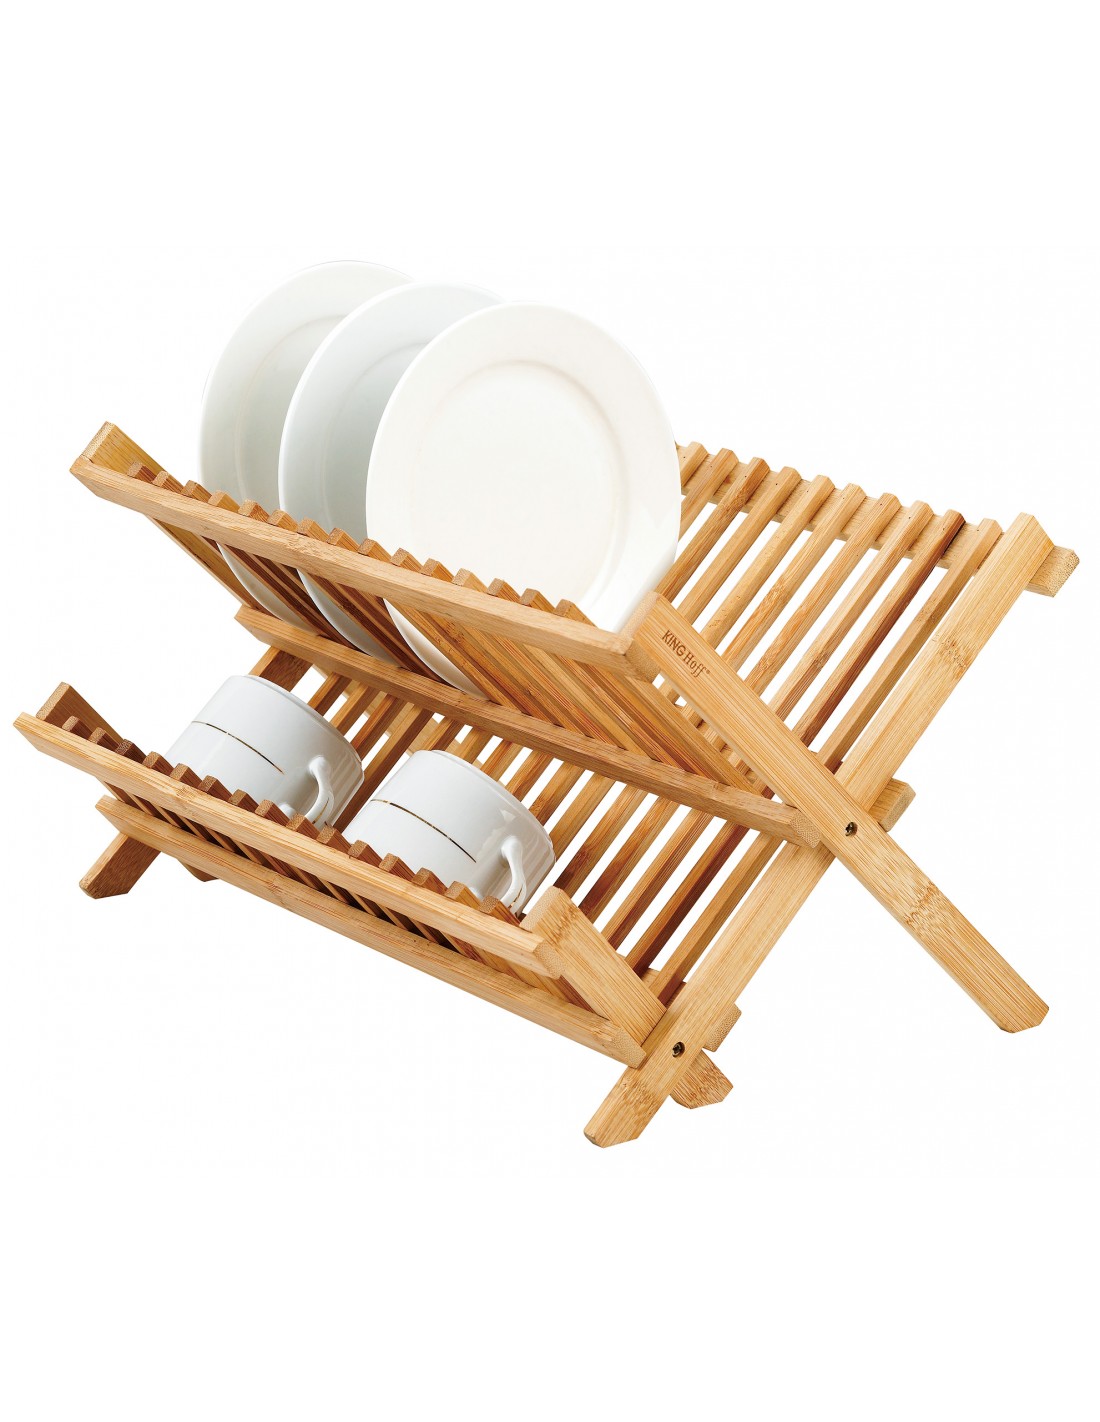 Dish Drying Rack Collapsible Compact Dish Rack Bamboo Dish Drainer